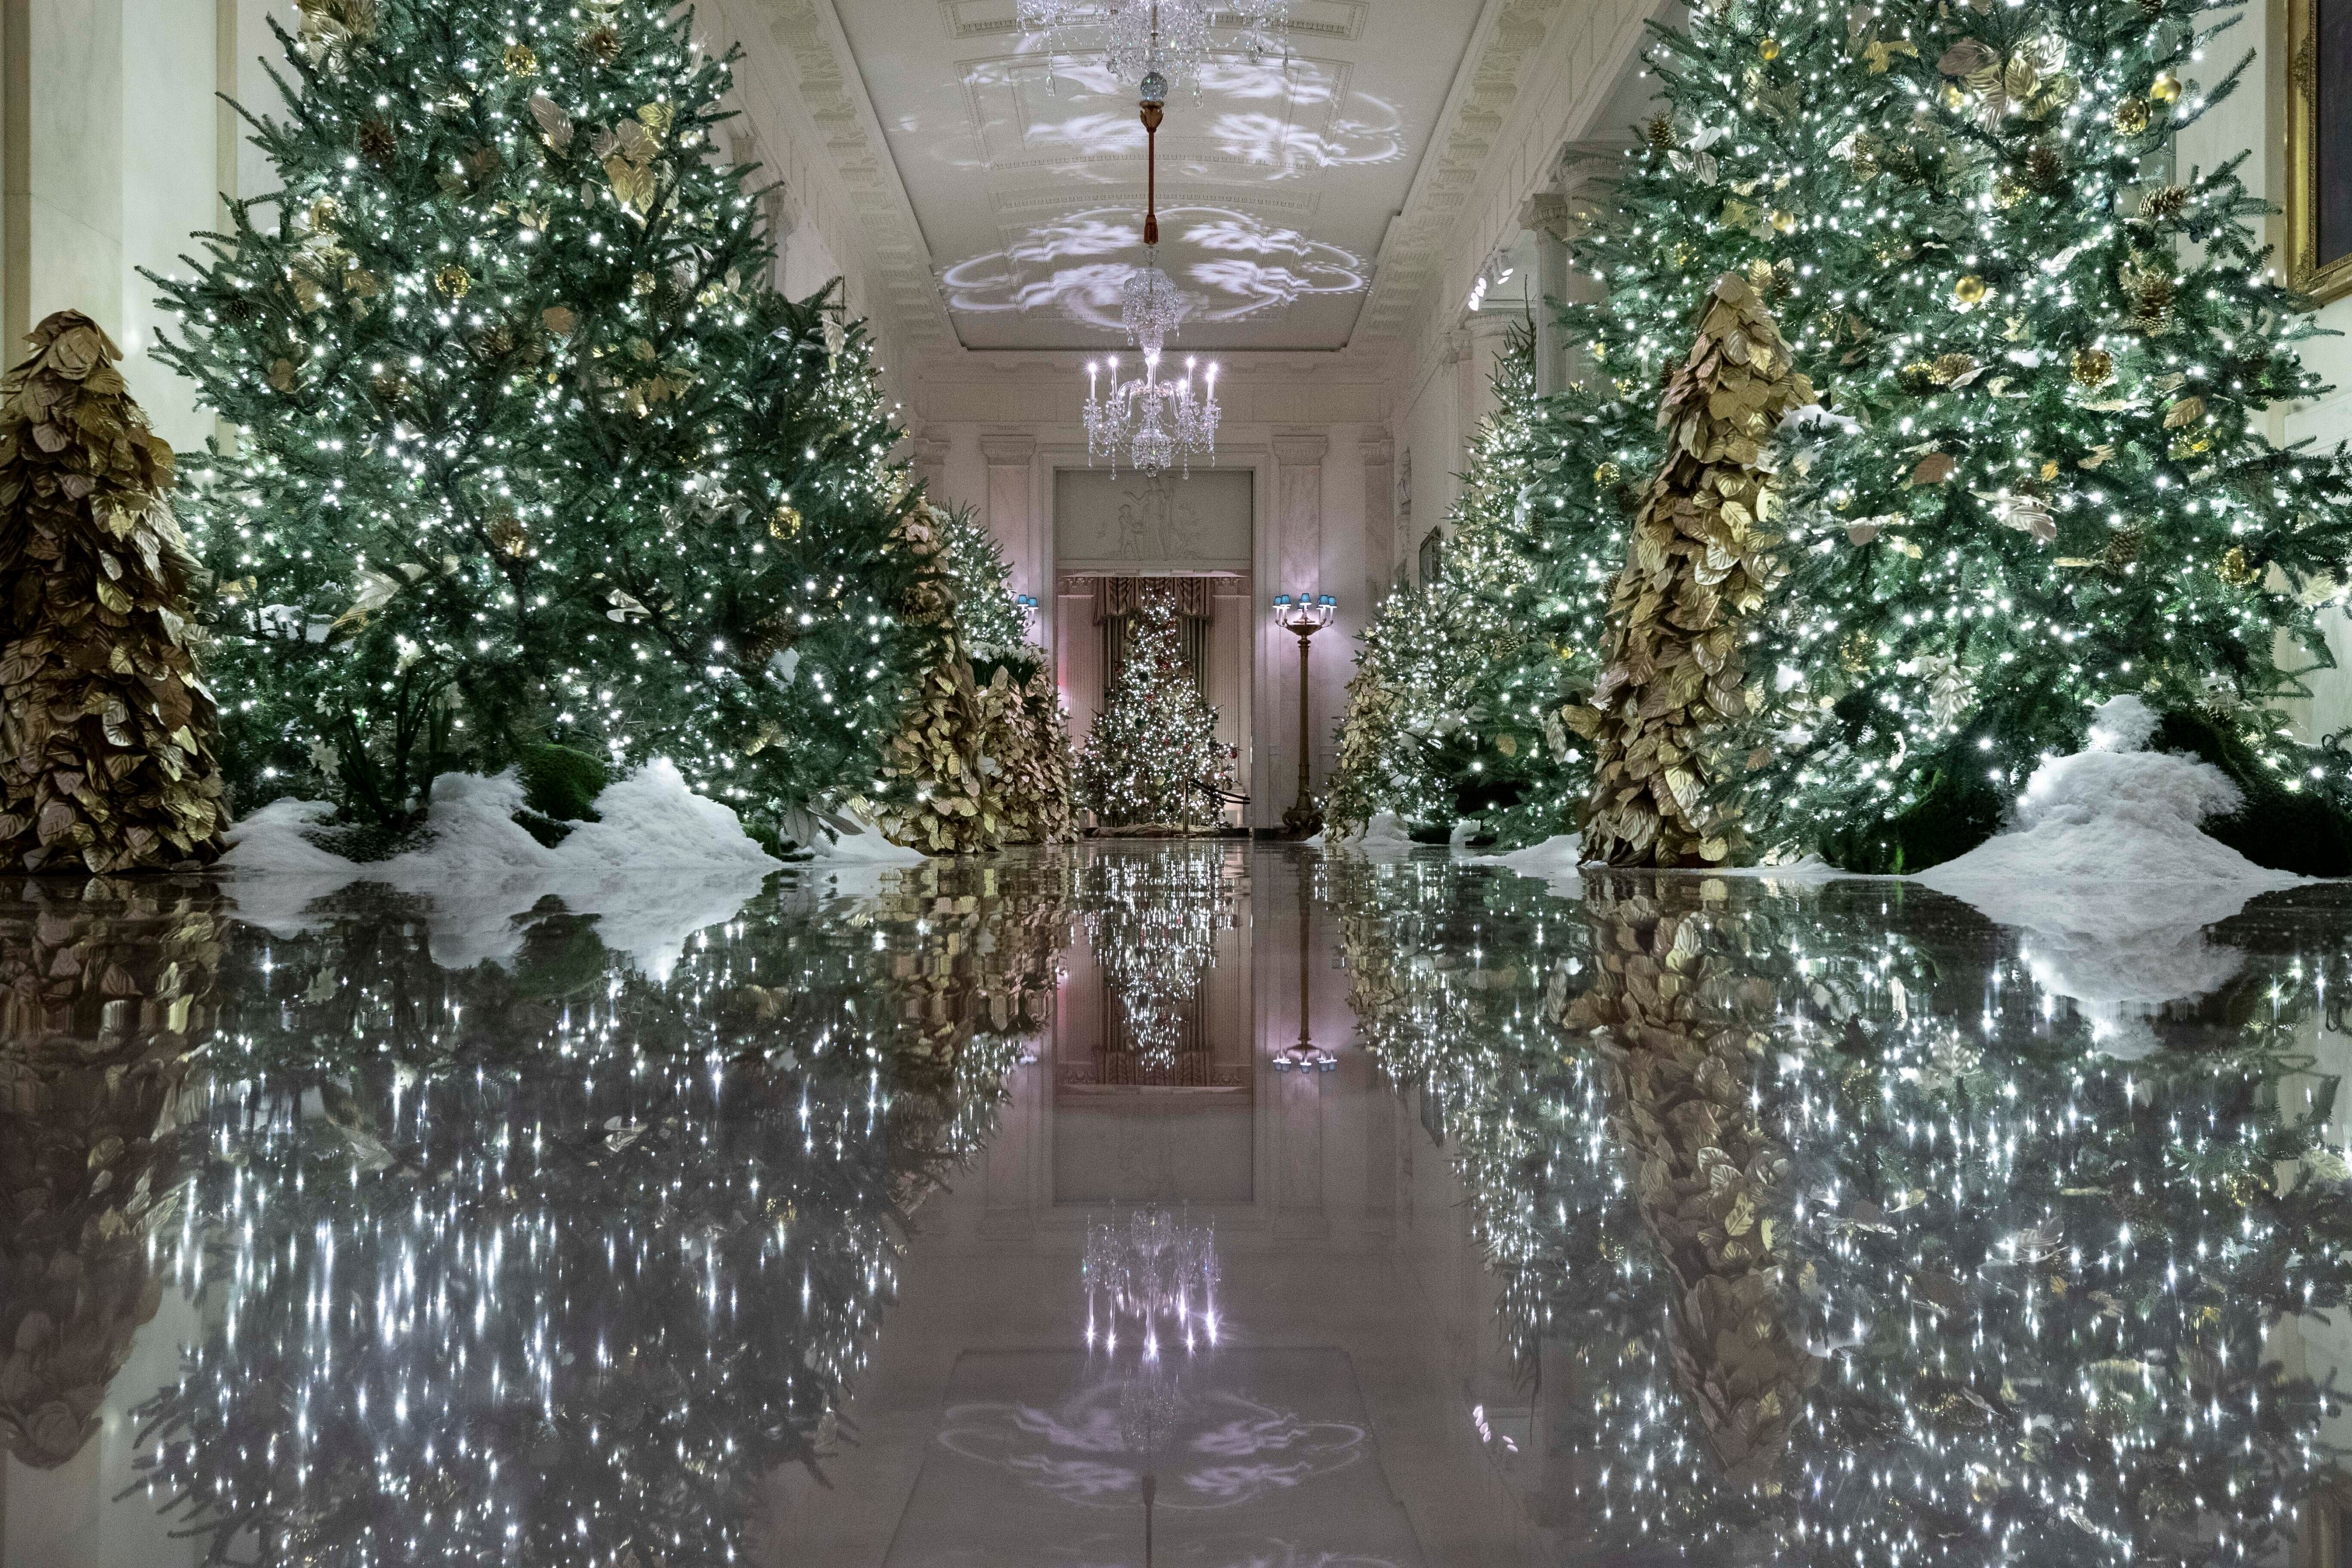 The Cross Hall leading into the State Dinning Room is decorated during the 2019 Christmas preview at the White House, Monday, Dec. 2, 2019, in Washington. (AP—Copyright 2019 The Associated Press. All rights reserved.)